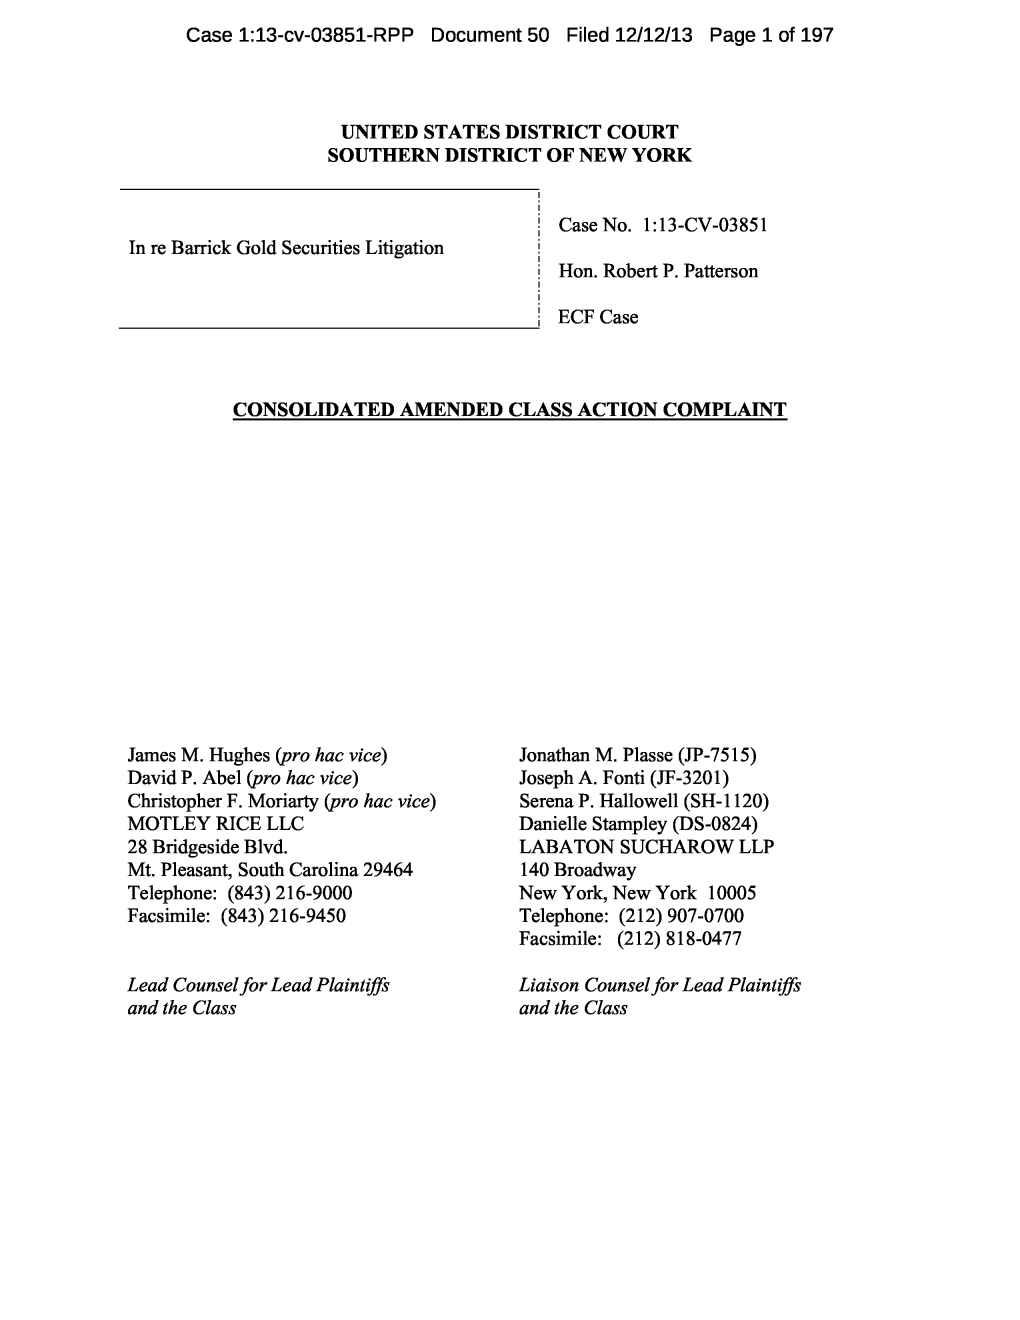 In Re Barrick Gold Securities Litigation 13-CV-03851-Consolidated